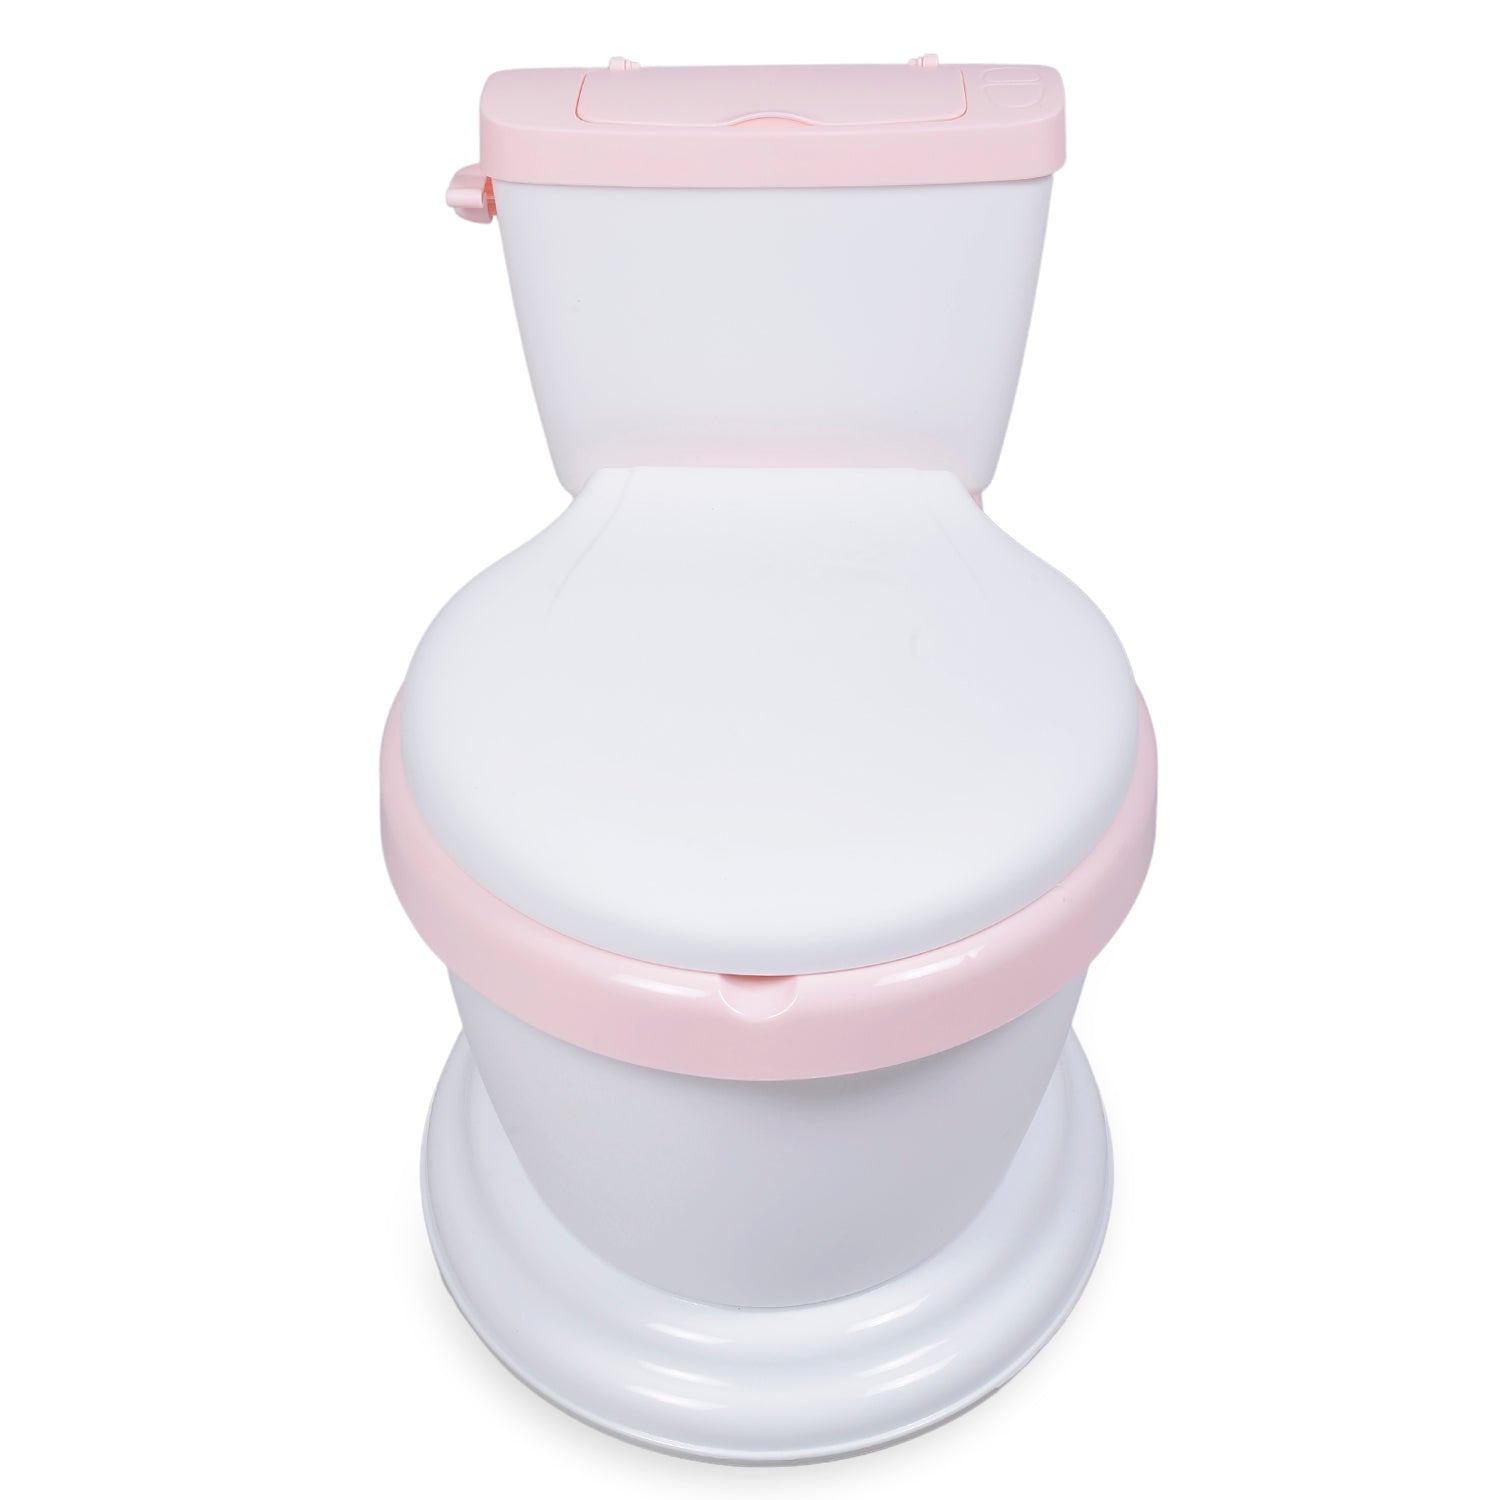 Baby Moo Toilet Training Potty Chair Realistic Western Style Pink